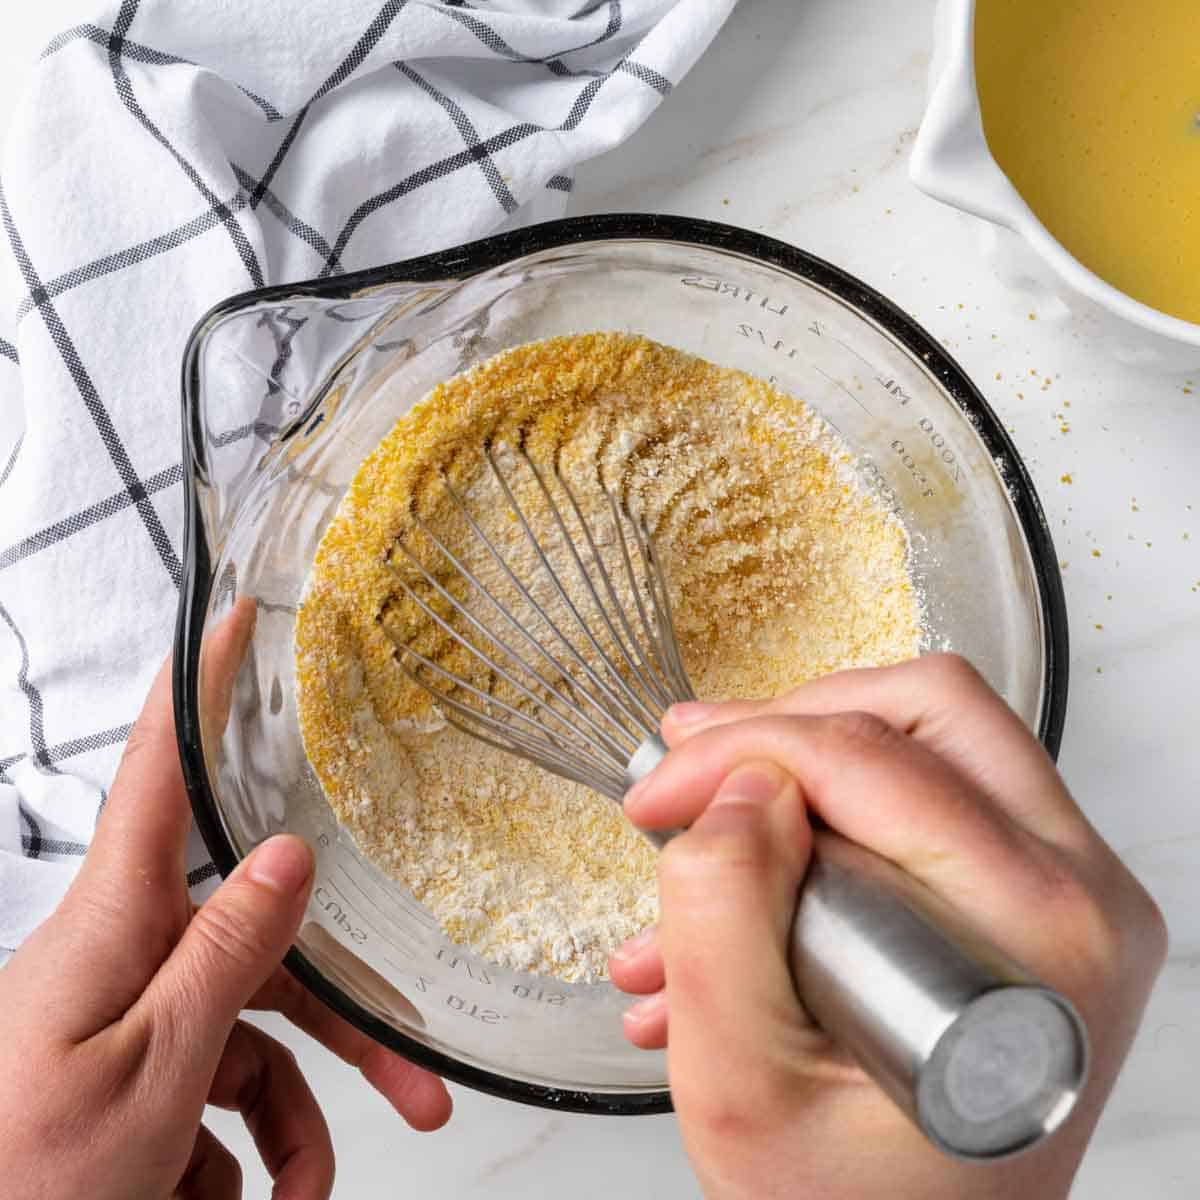 Whisking the dry ingredients together